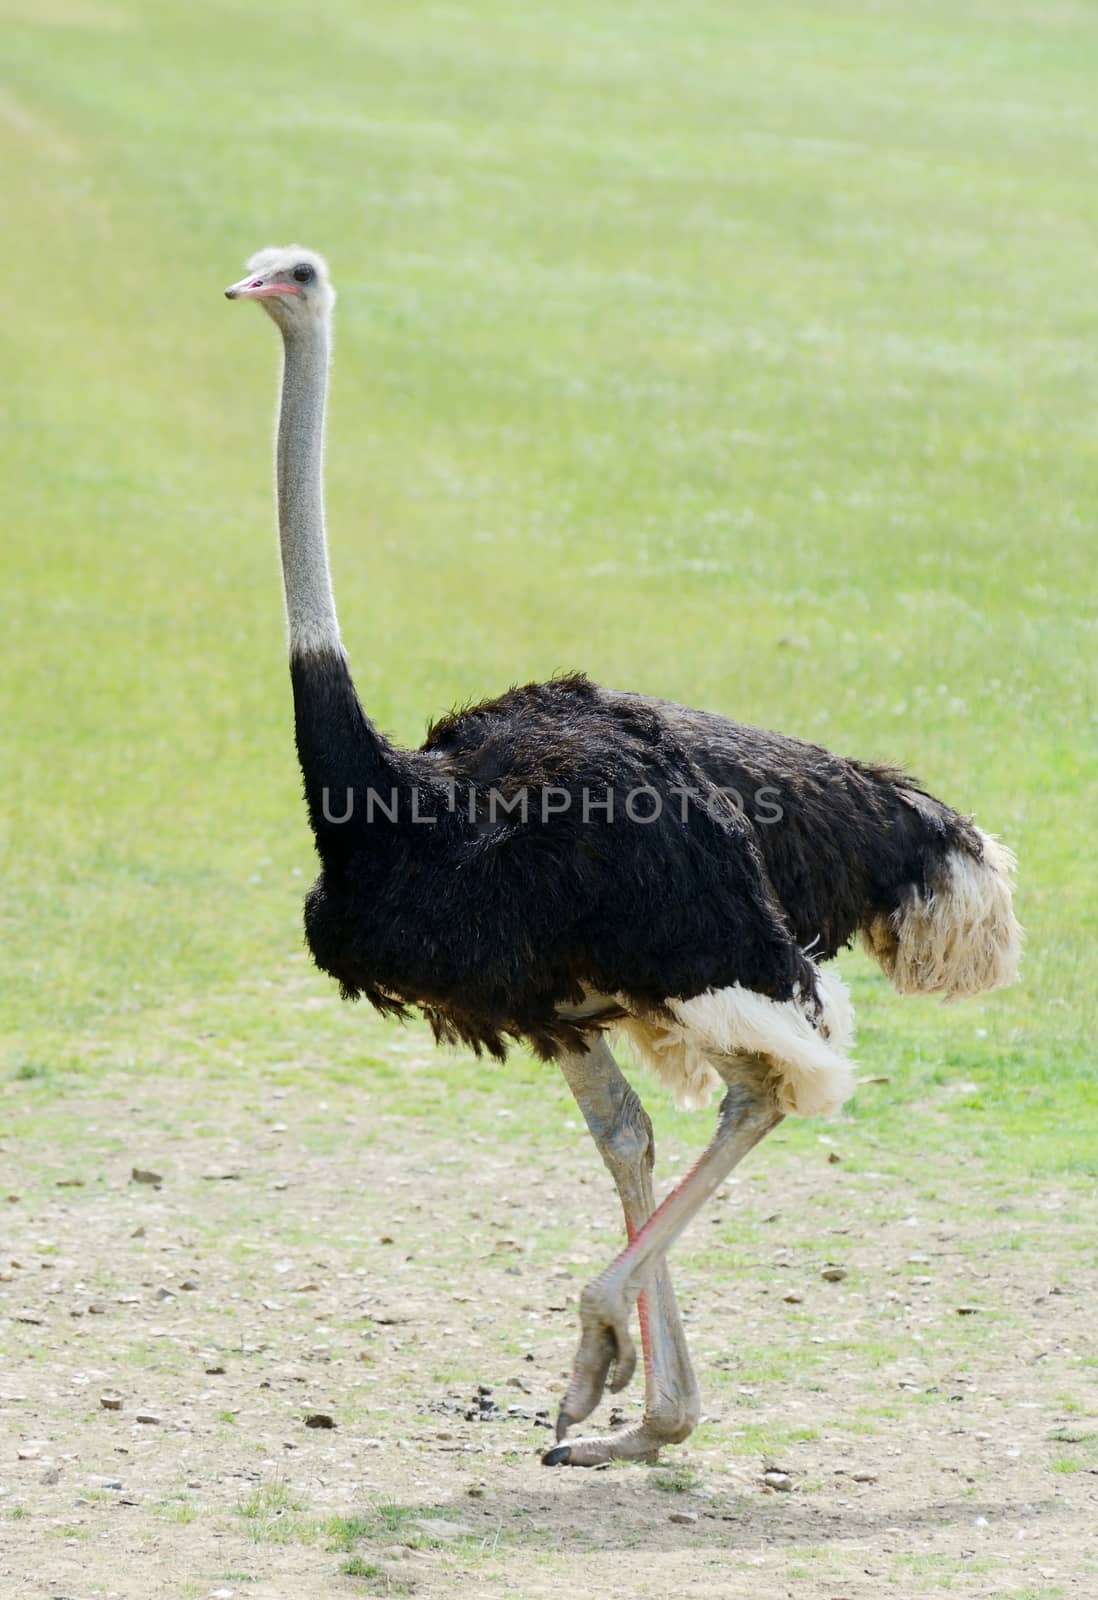 Ostrich by kmwphotography